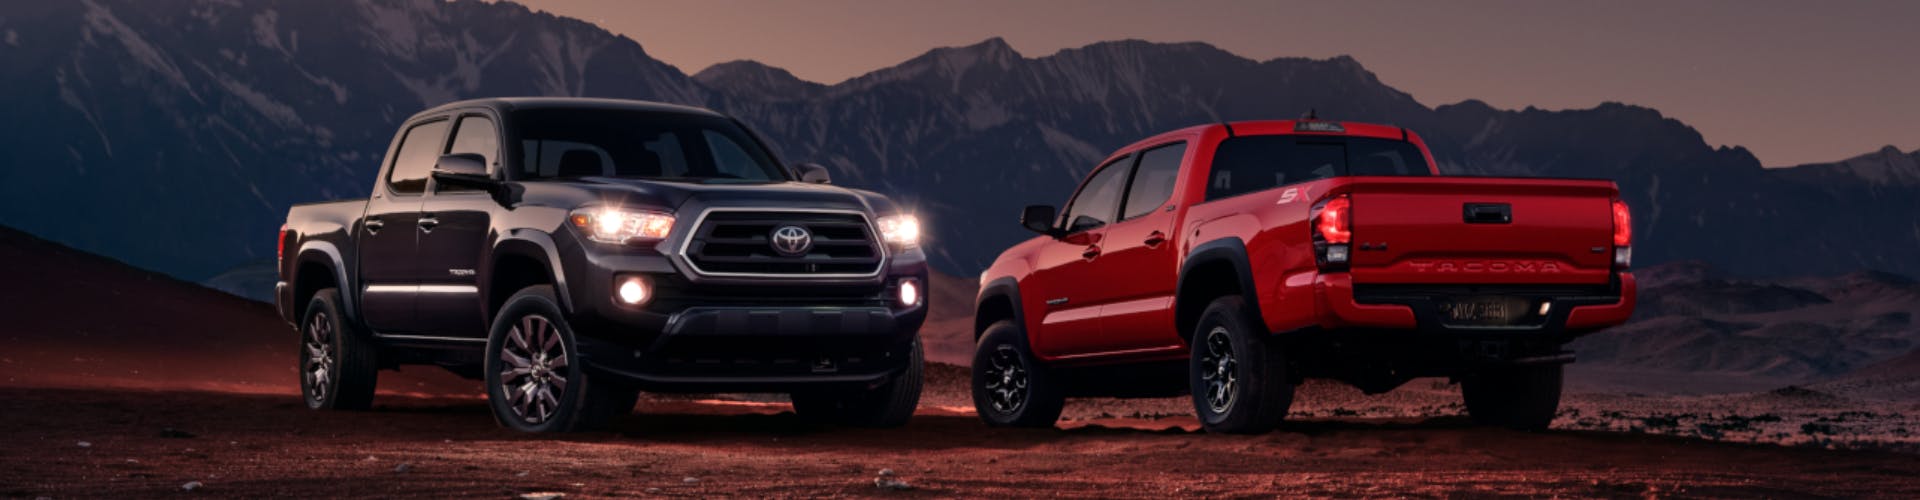 Black and Red Toyota Tacoma trucks parked in front of mountains